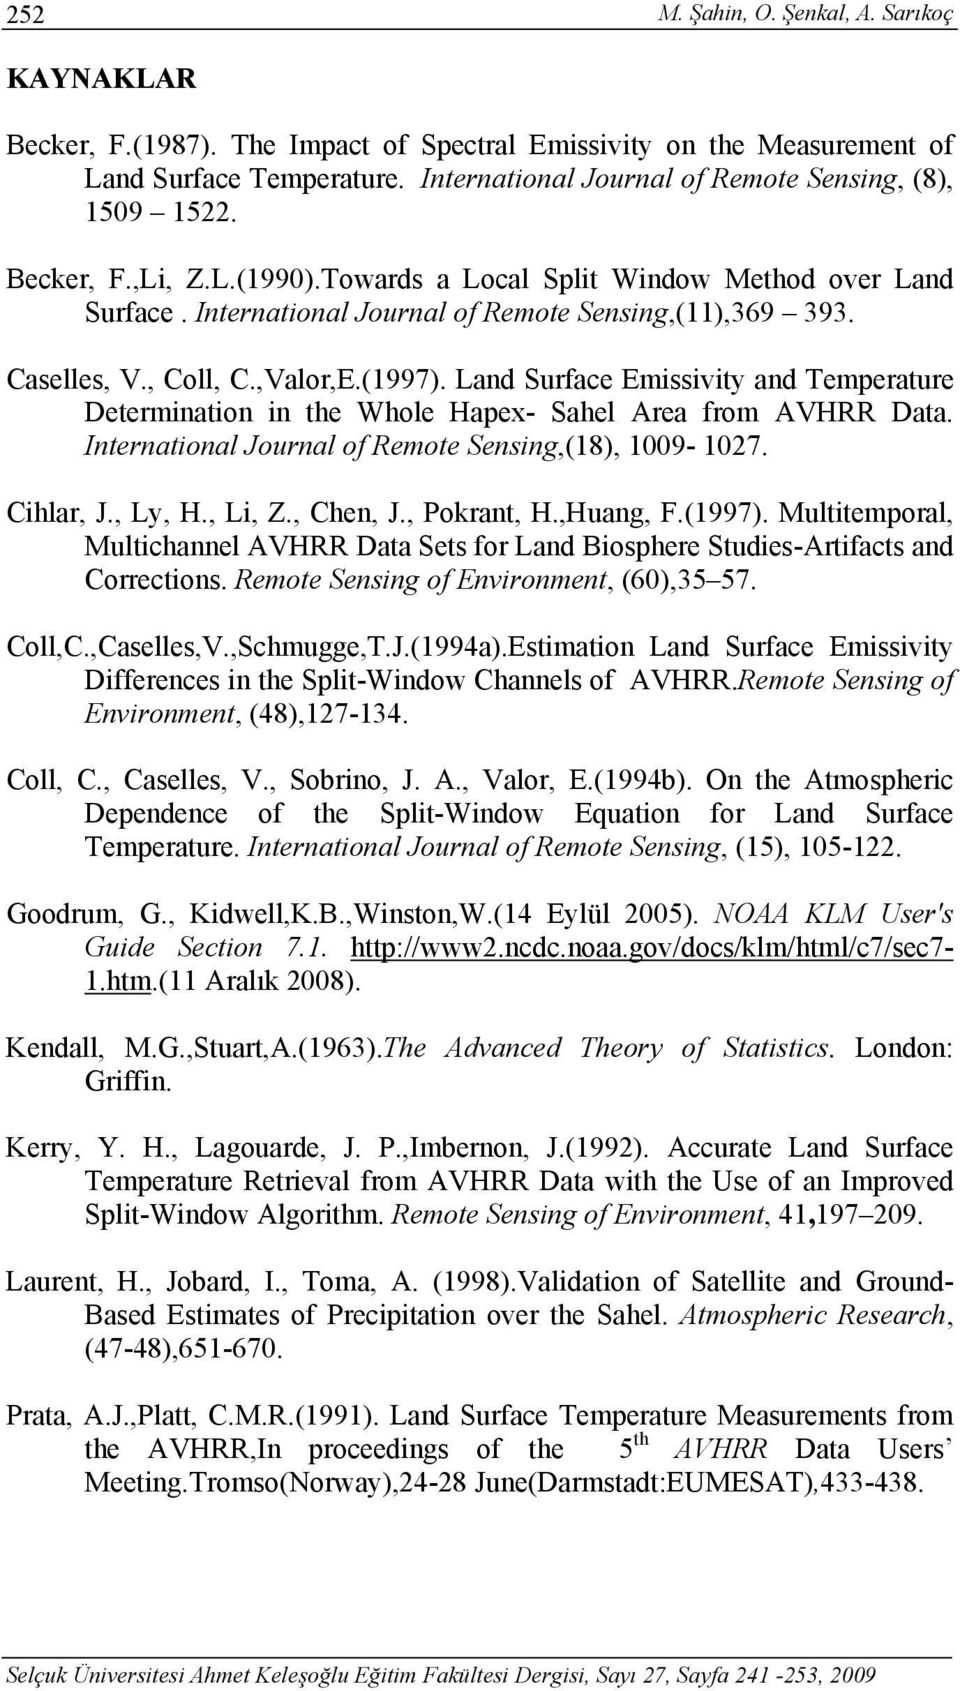 Caselles, V., Coll, C.,Valor,E.(1997). Land Surface Emissivity and Temperature Determination in the Whole Hapex- Sahel Area from AVHRR Data. International Journal of Remote Sensing,(18), 1009-1027.